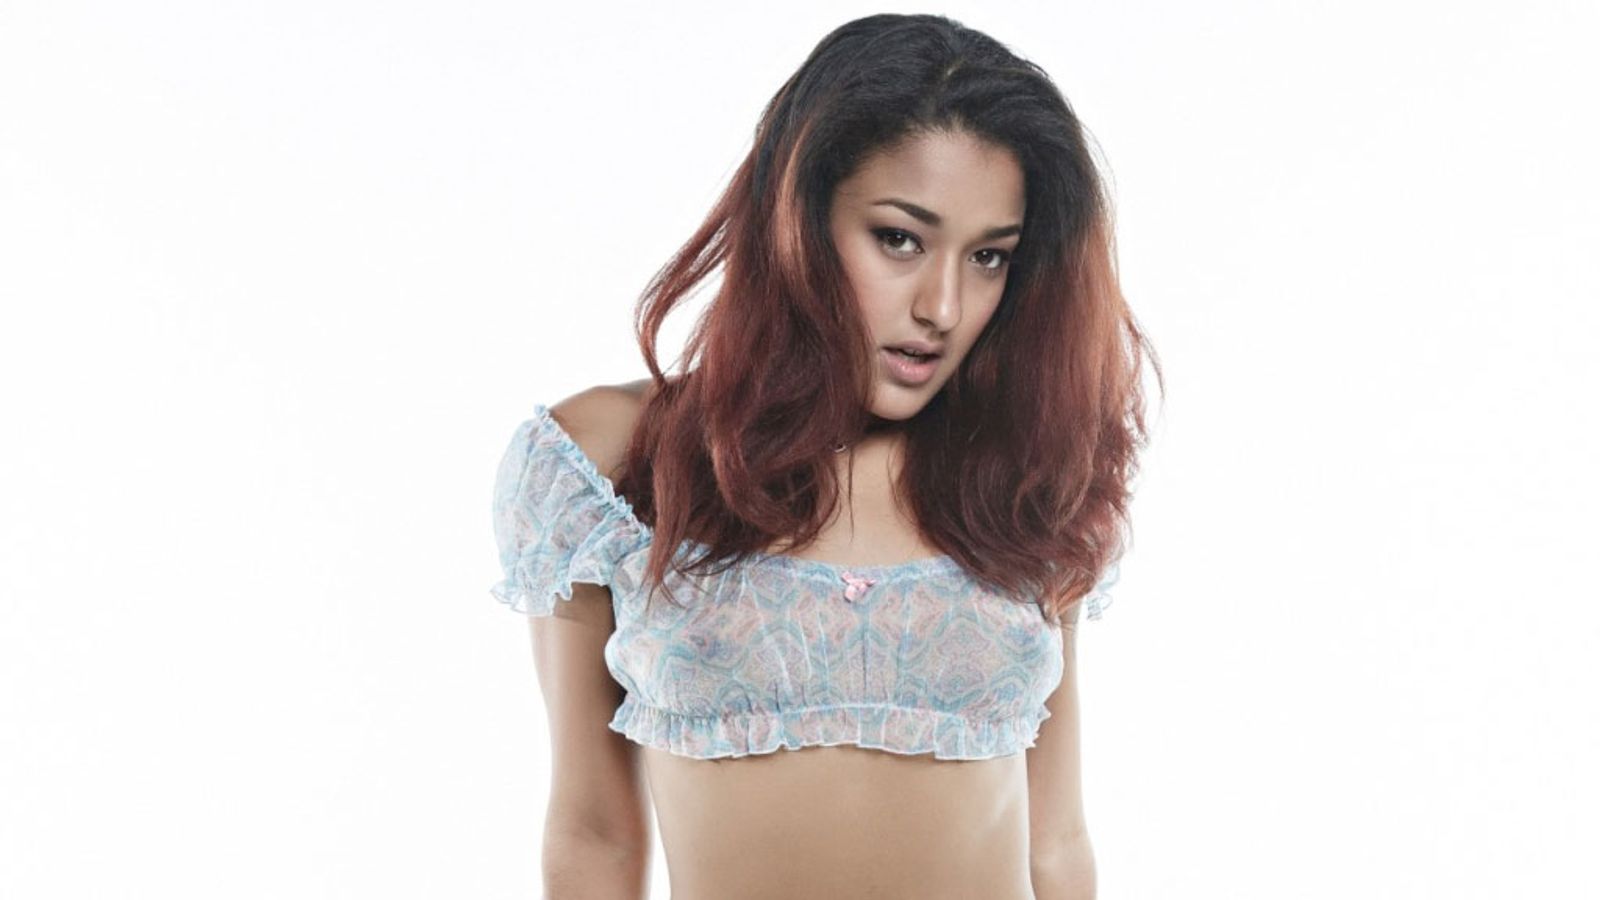 Daisy Ducati Is Latest Star To Sign With Skyn Talent